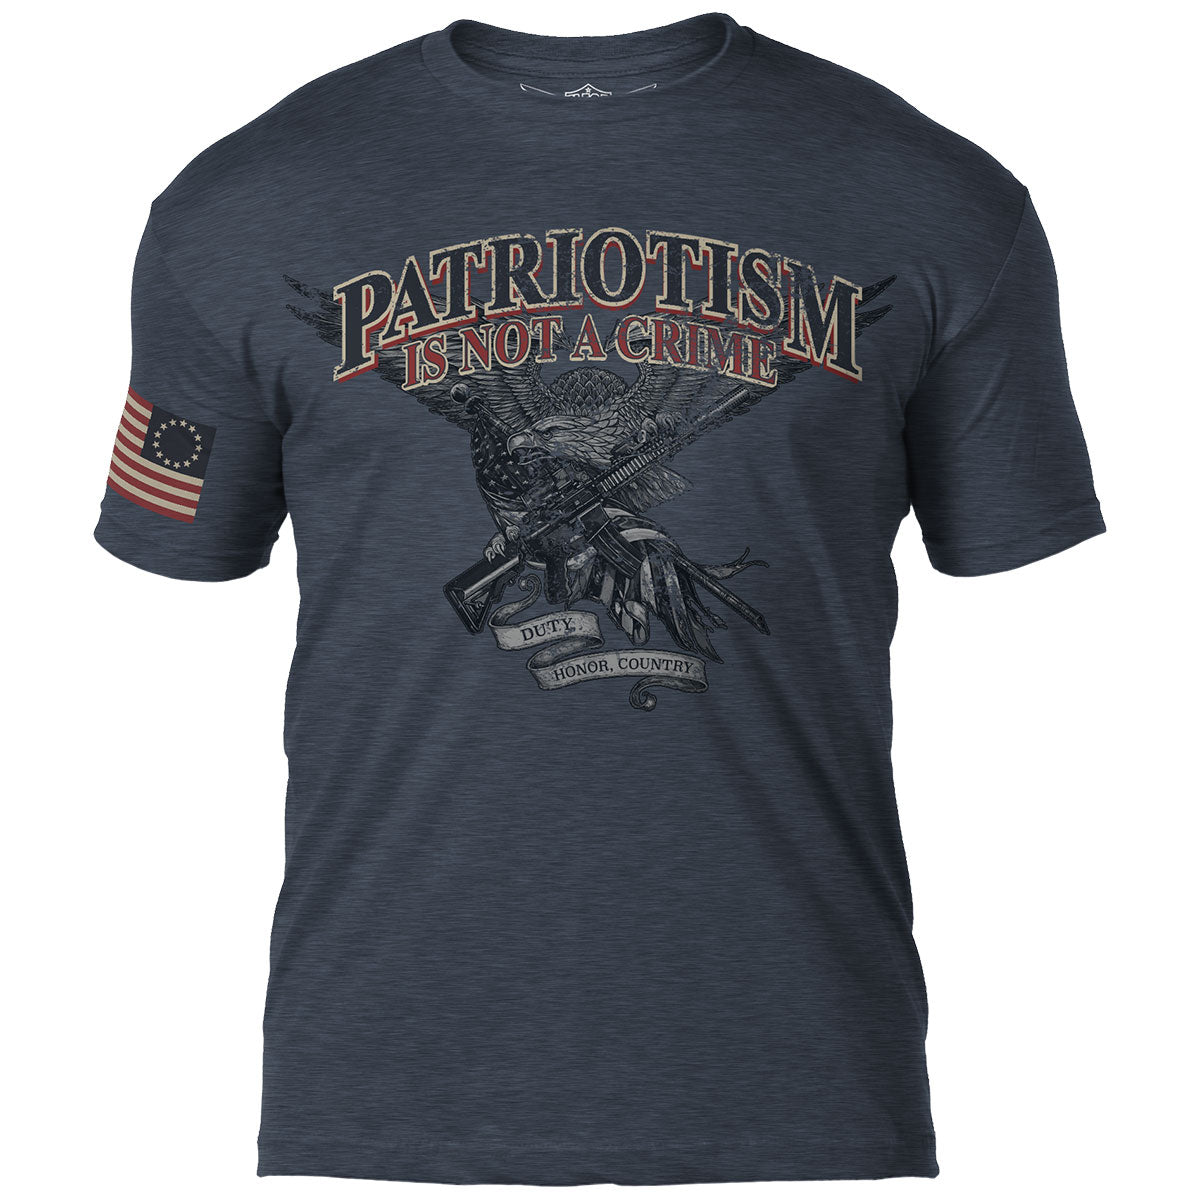 New for 2020! Our All-New 'Patriotism Is Not A Crime' Tee